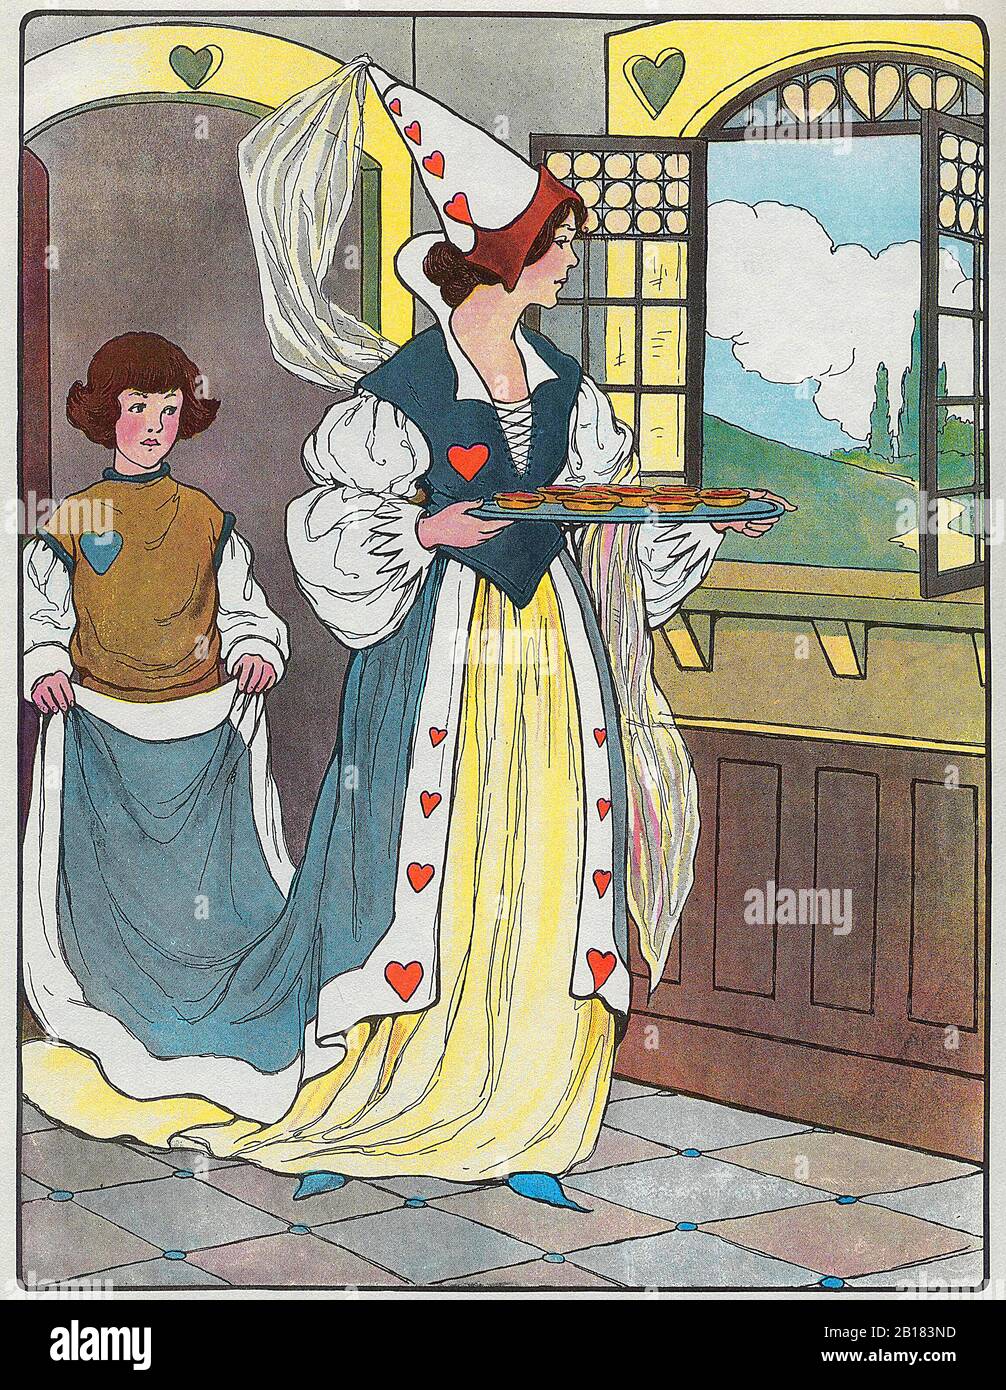 The Queen of Hearts, She made some tarts, All on a summer's day - The Real Mother Goose Nursery Rhyme Illustration by Blanche Fisher Wright circa 1915 Stock Photo